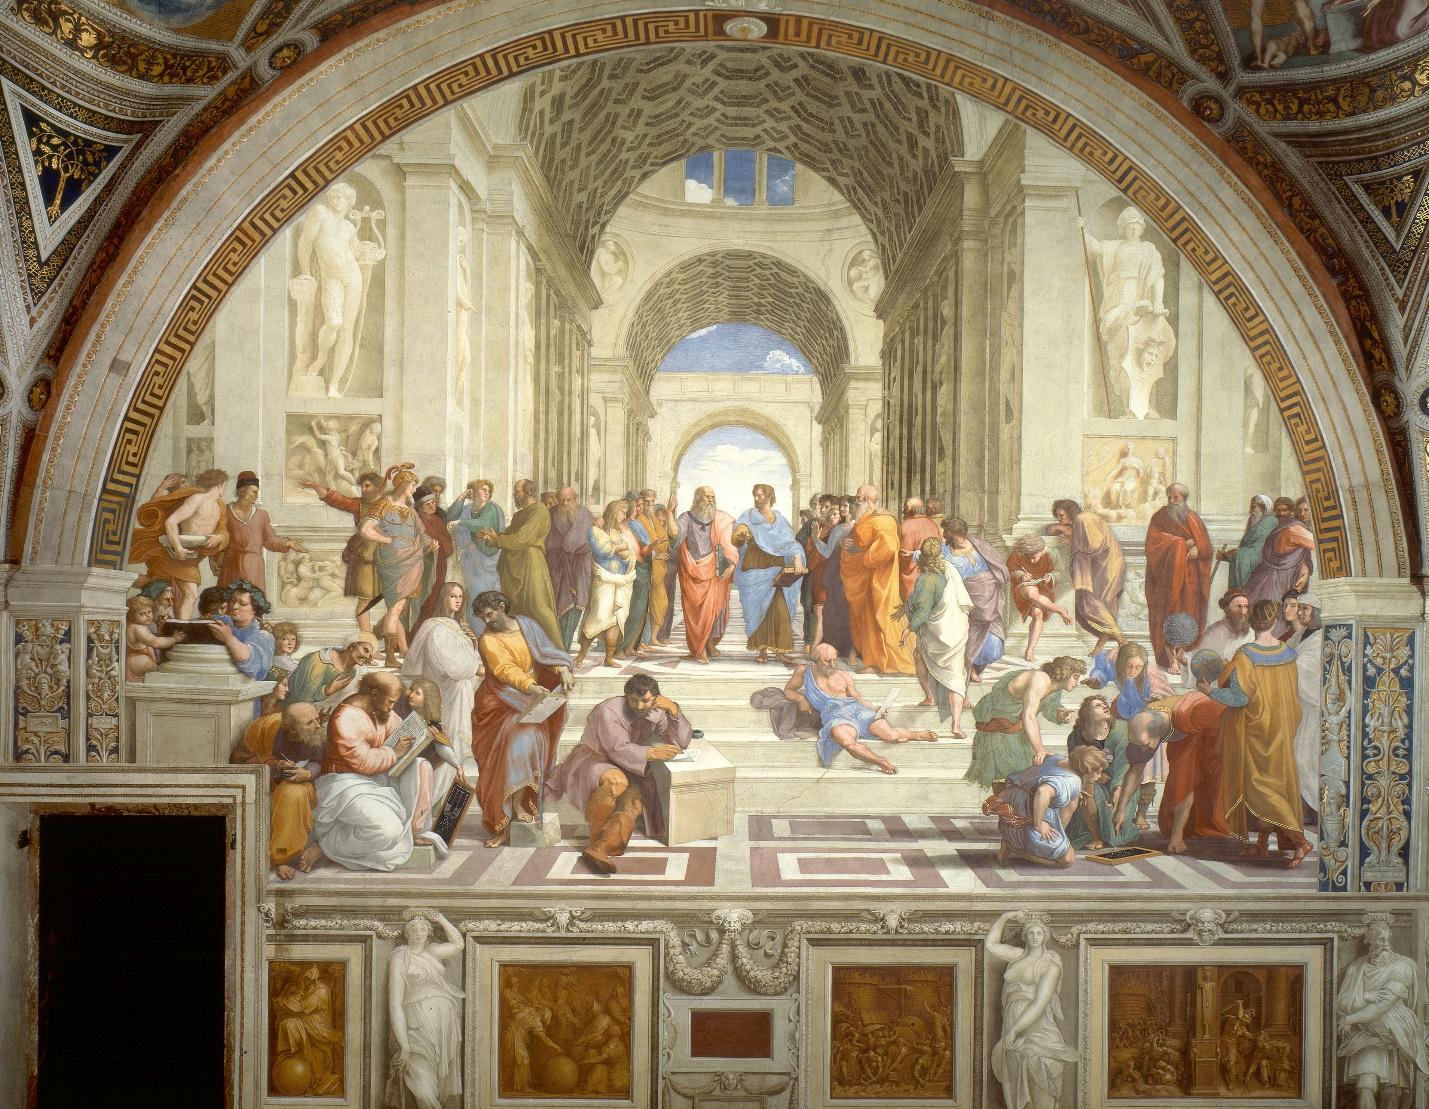 The Painting The School of Athens by Raphael